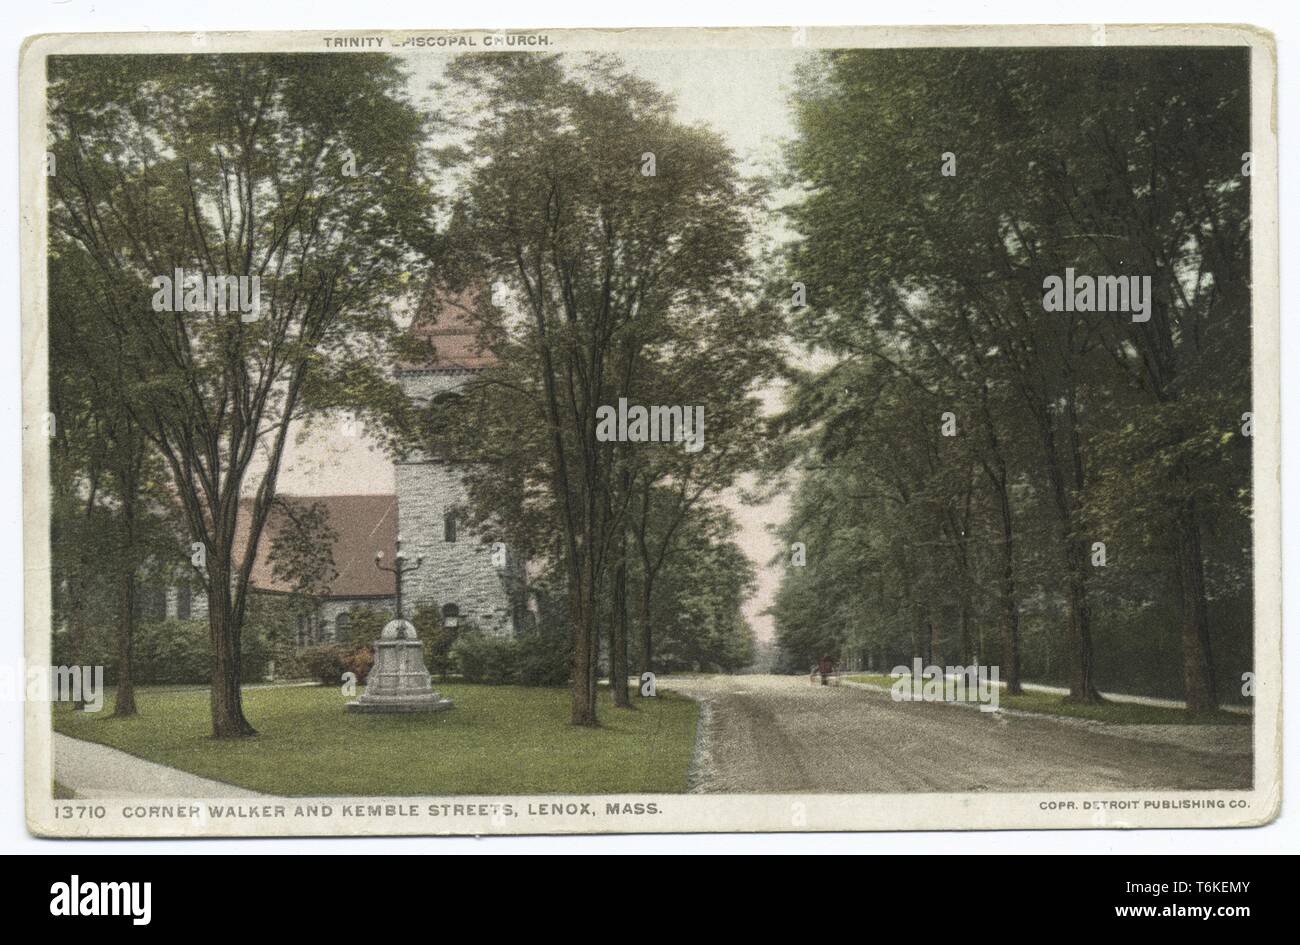 Detroit Publishing Company vintage postcard depicting the Trinity Episcopal Church at the shady corner of Walker and Kemble Streets in Lenox, Massachusetts, 1914. From the New York Public Library. () Stock Photo